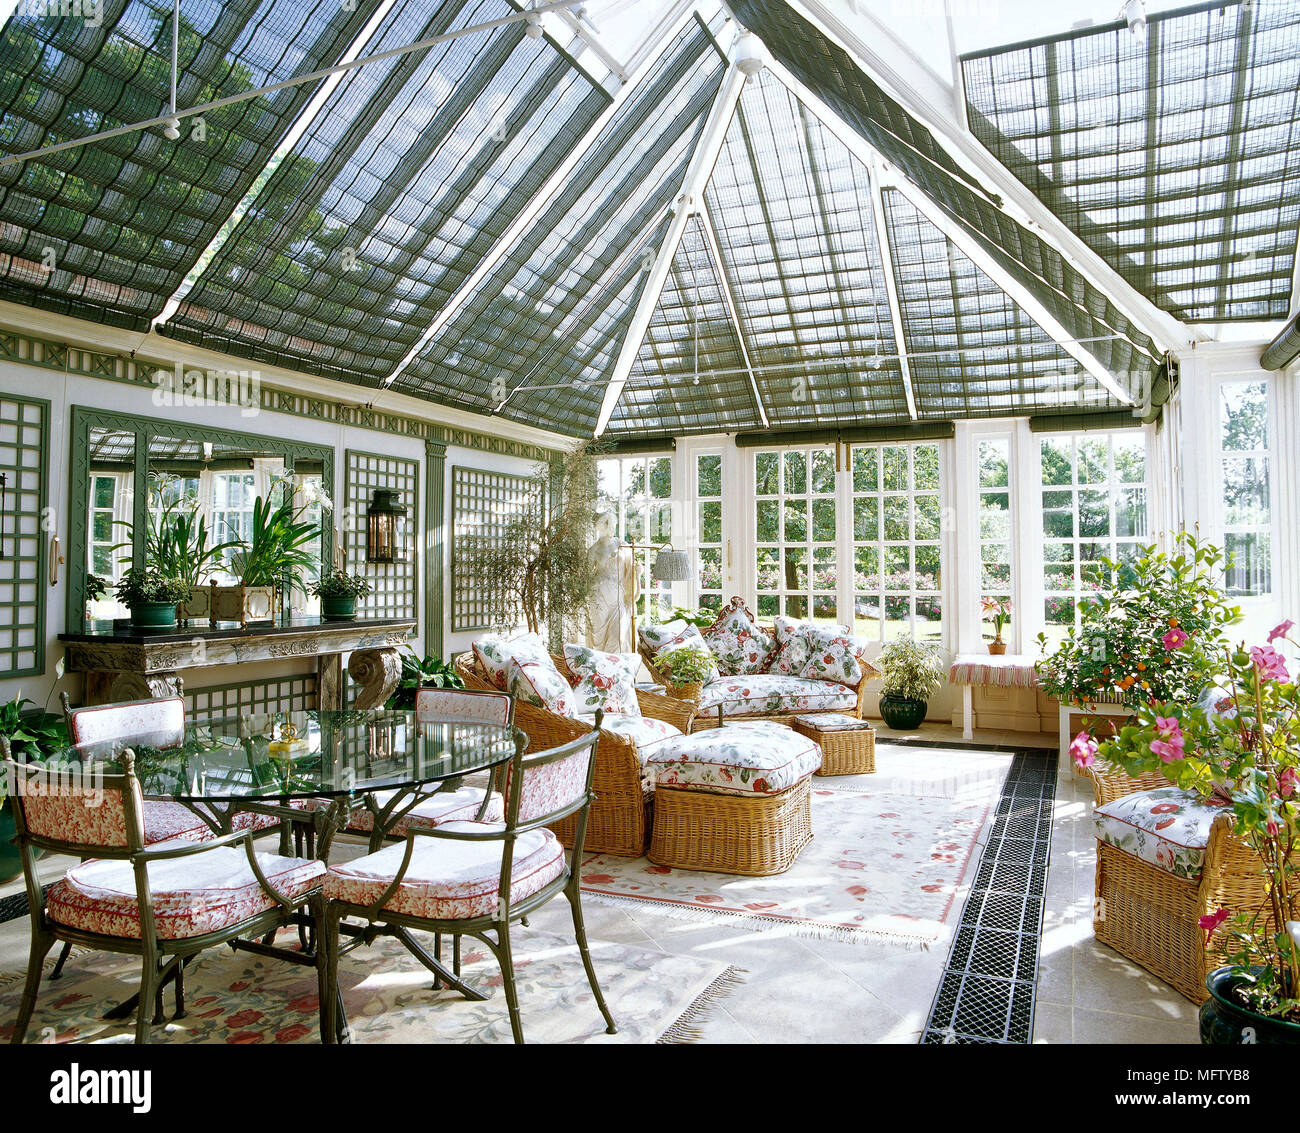 A traditional conservatory with wicker furniture, glass dining table, metal chairs, Stock Photo